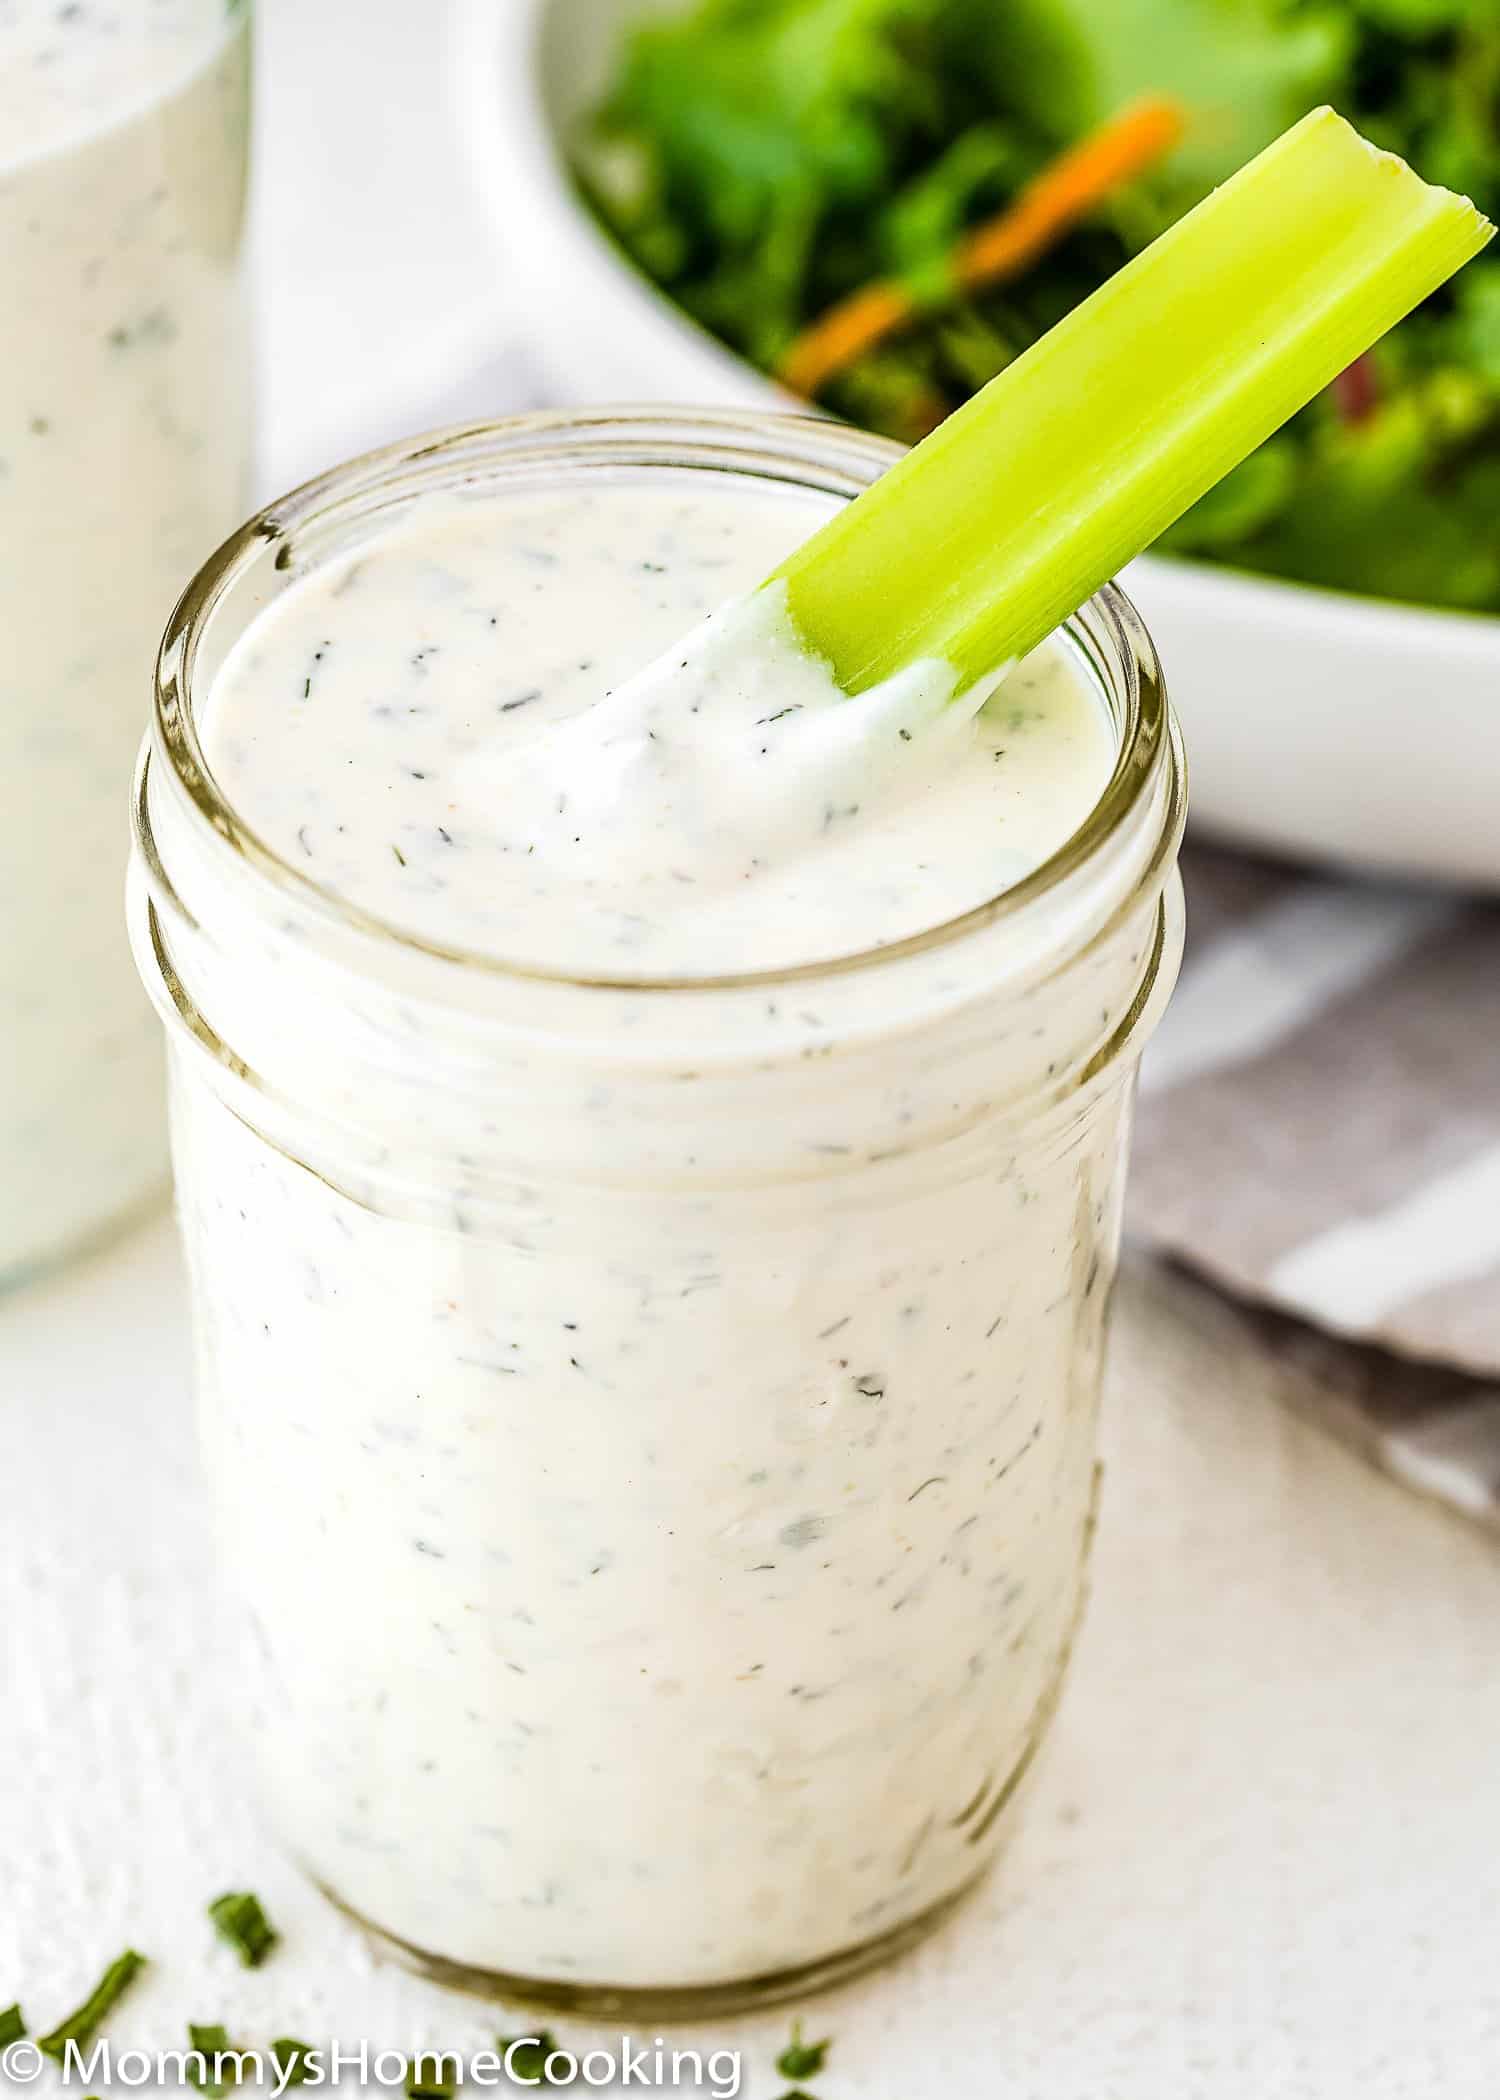 Homemade Eggless Ranch Dressing/sauce in a glass jar with a celery stick